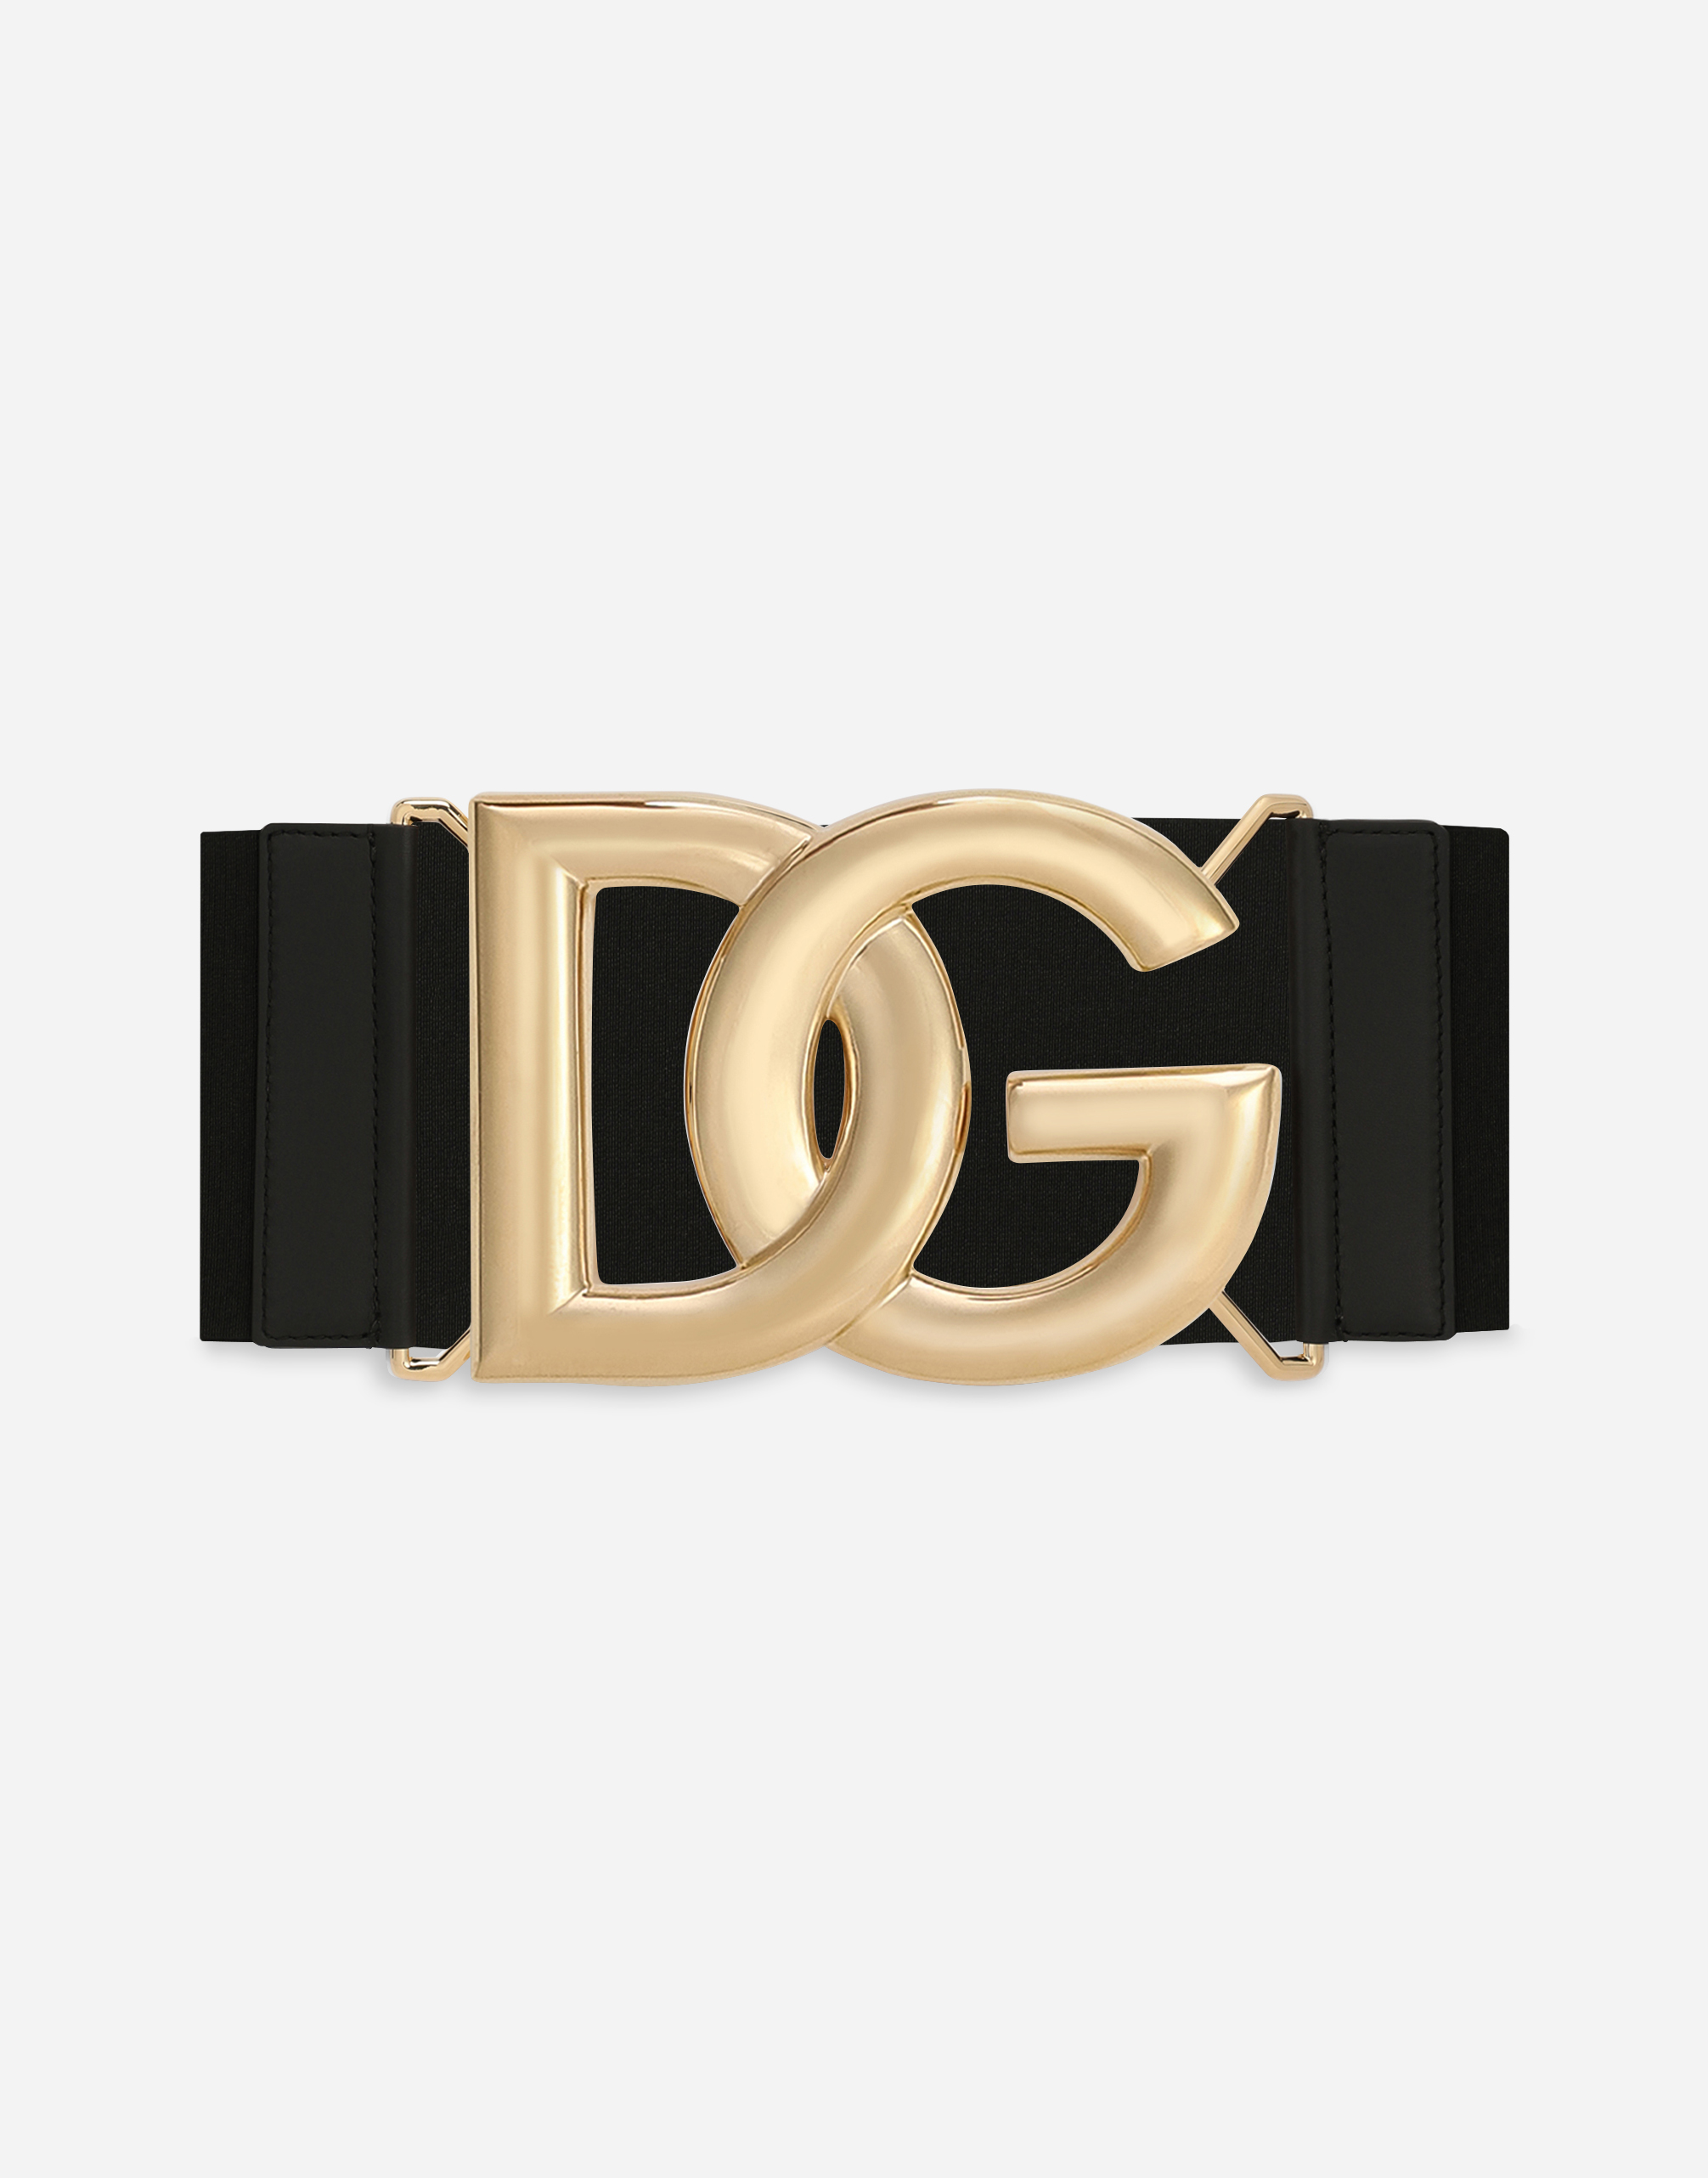 Stretch band belt with crossover DG logo buckle in Black